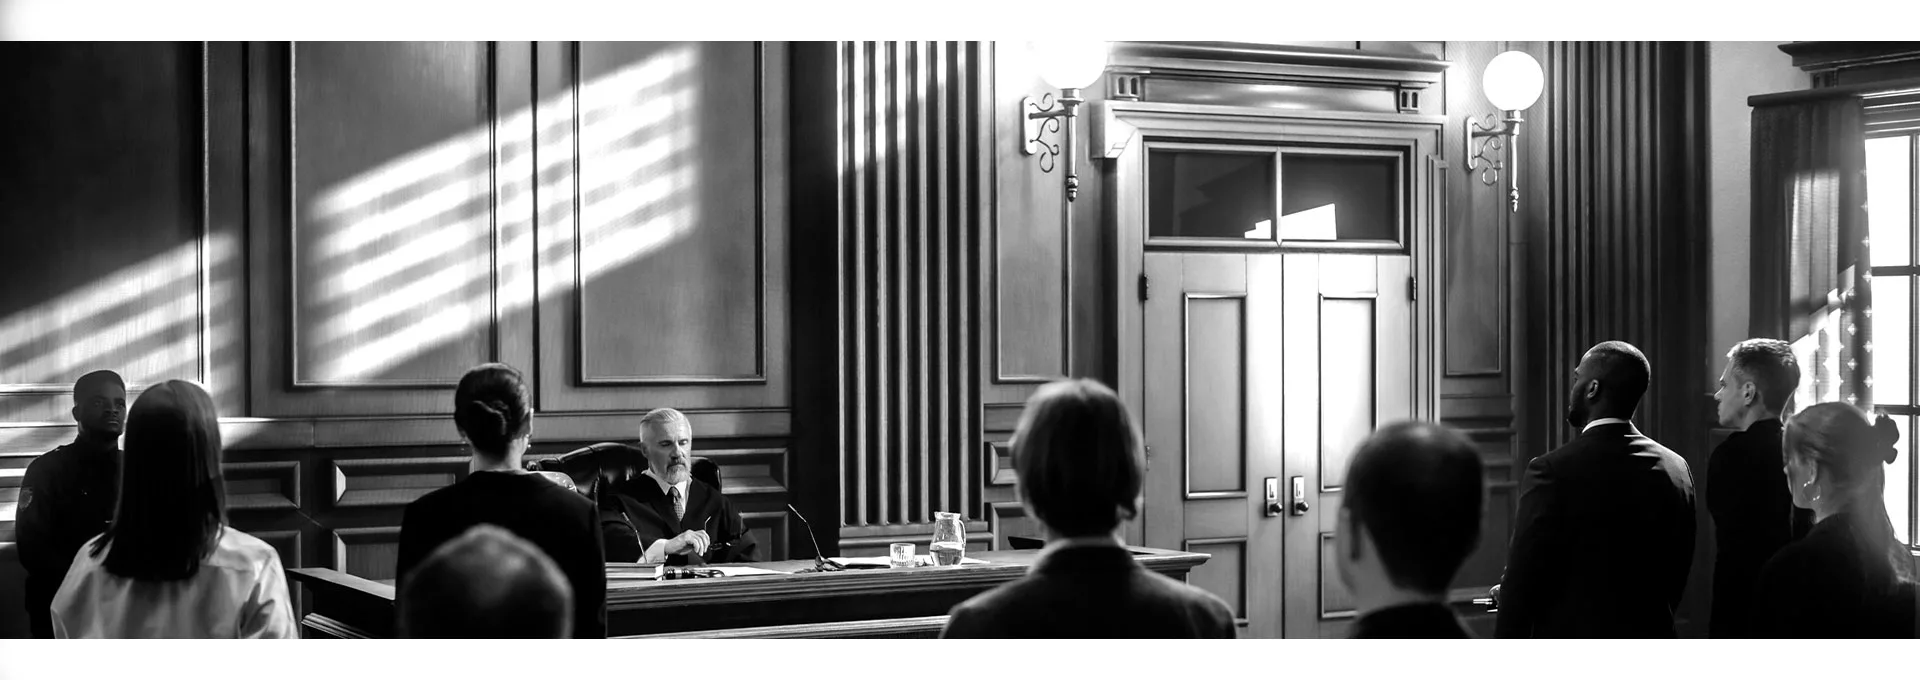 Courtroom photograph showing judge at bench with counsel in front of him, Lead Science provides digital marketing services to legal professionals